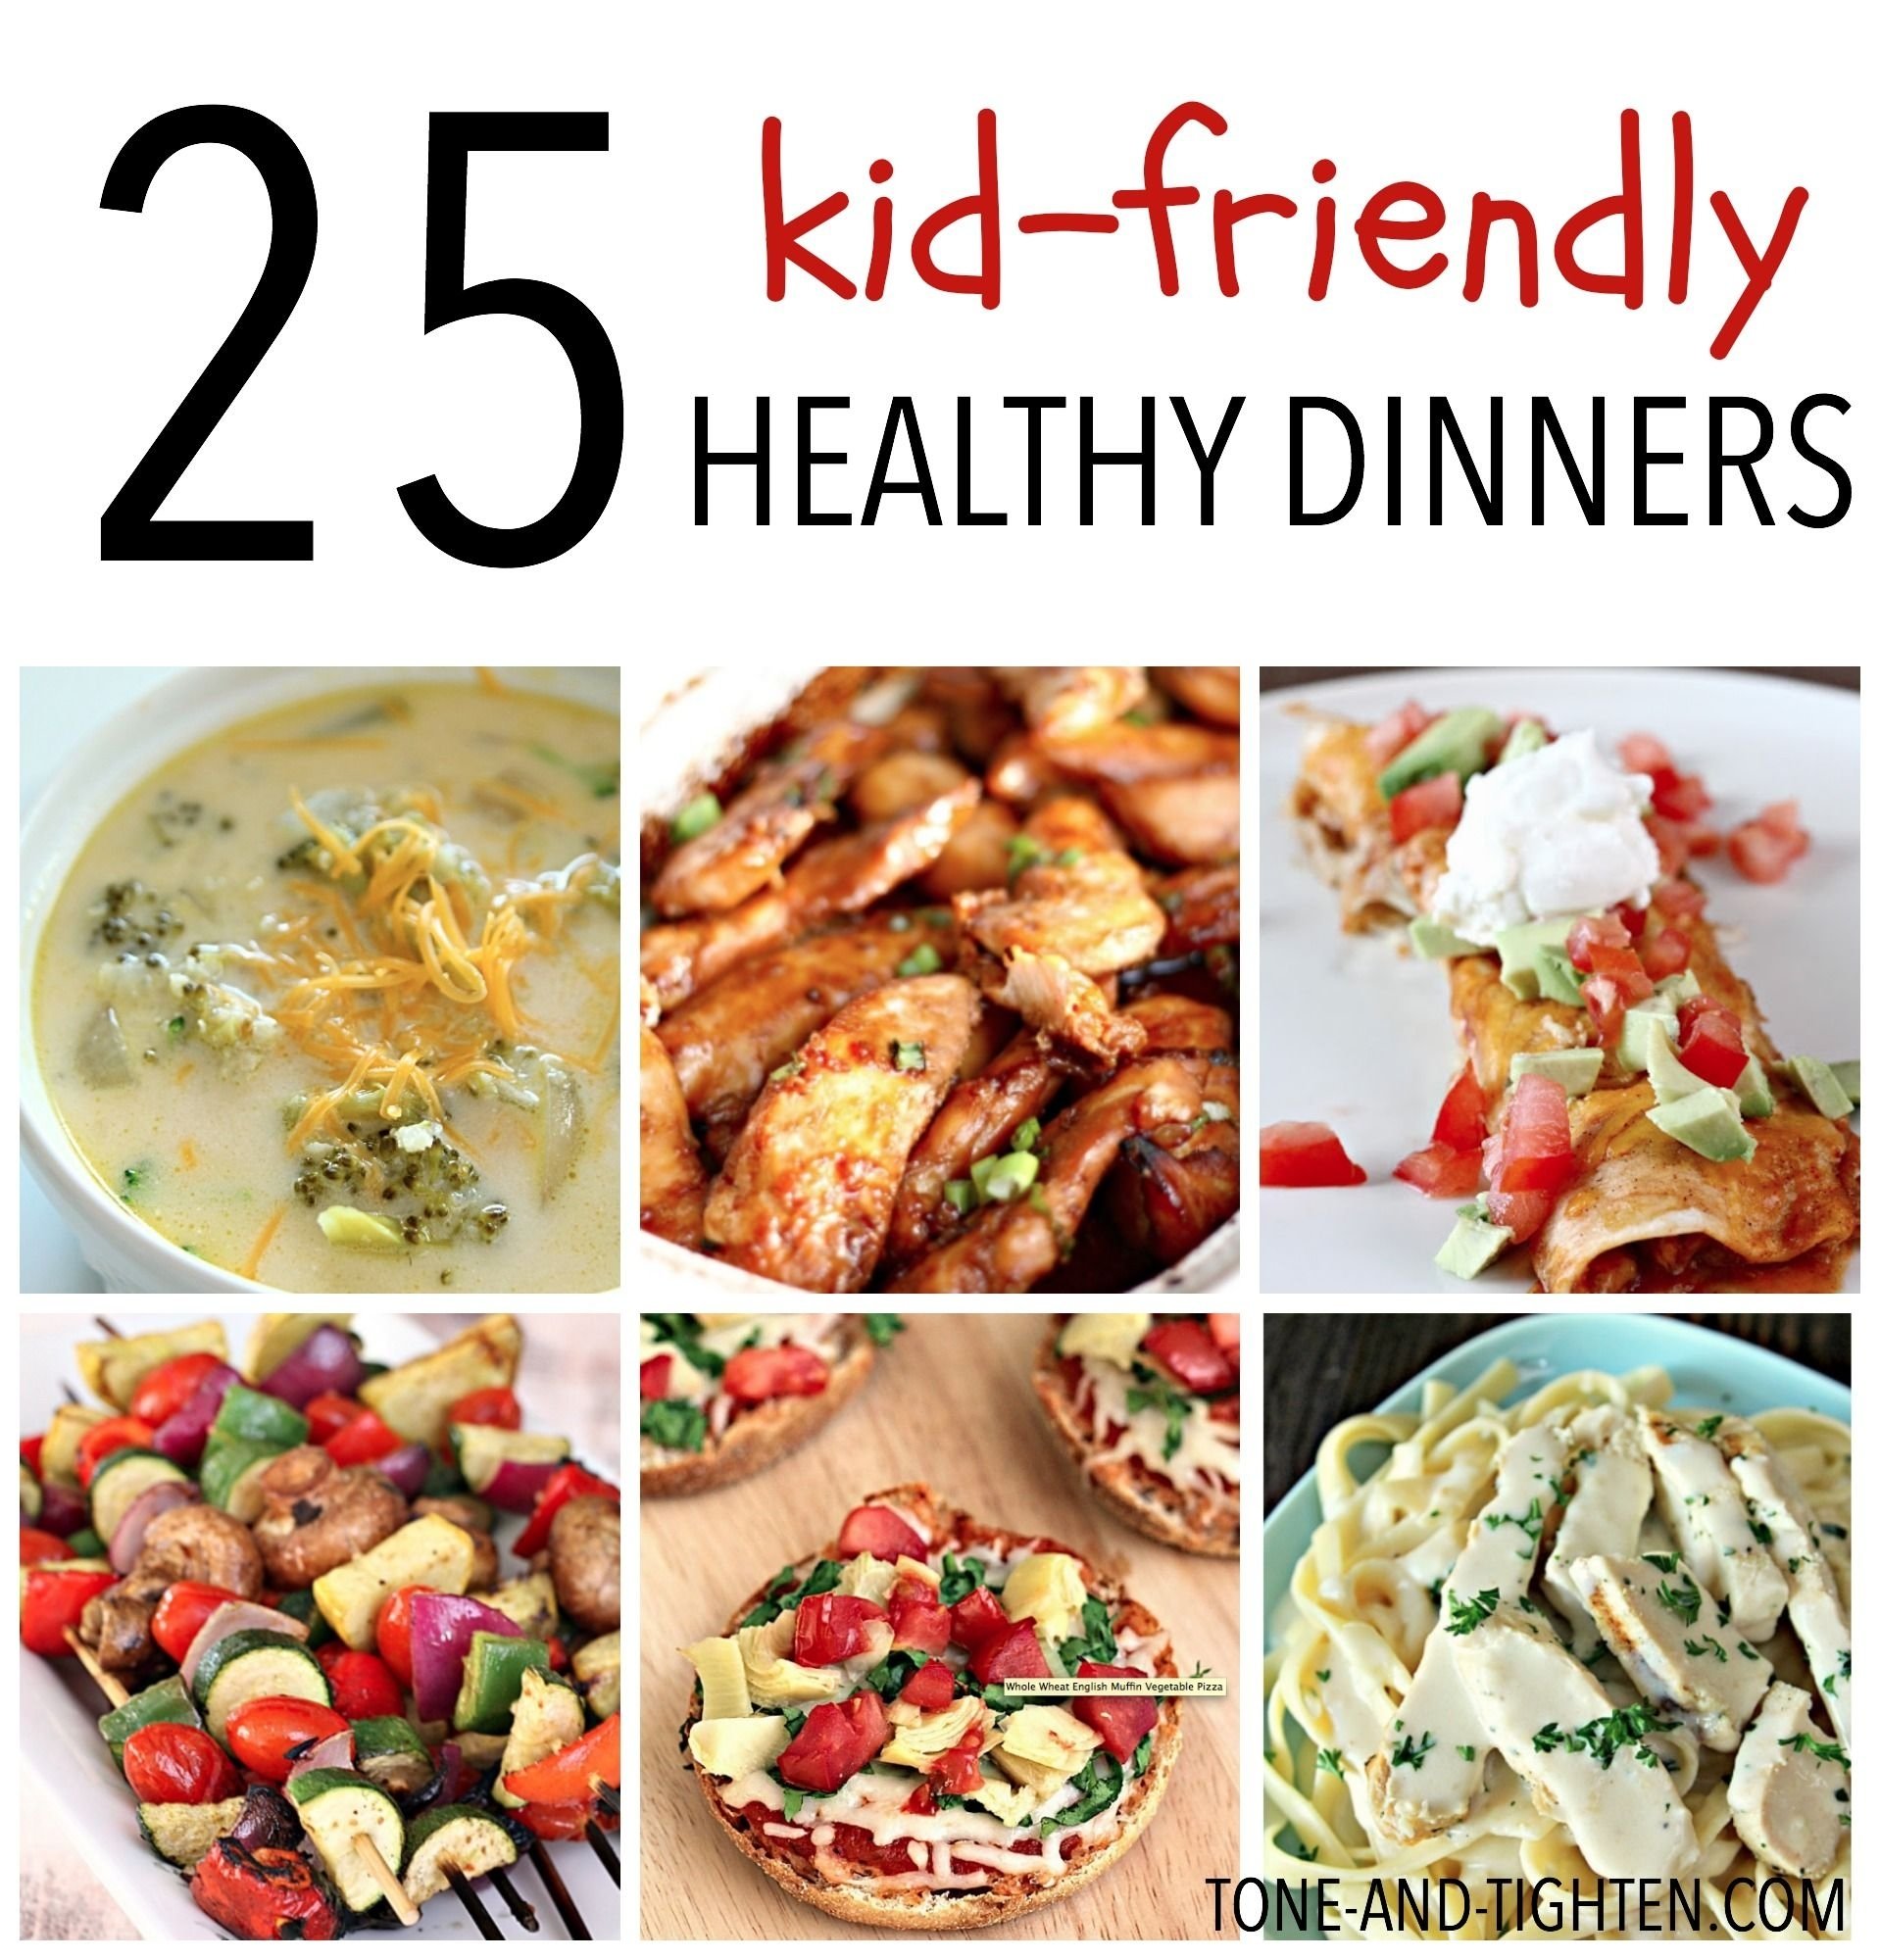 10 Famous Healthy Meal Ideas For Kids 25 kid friendly healthy dinner recipes healthy recipes dinners 2022